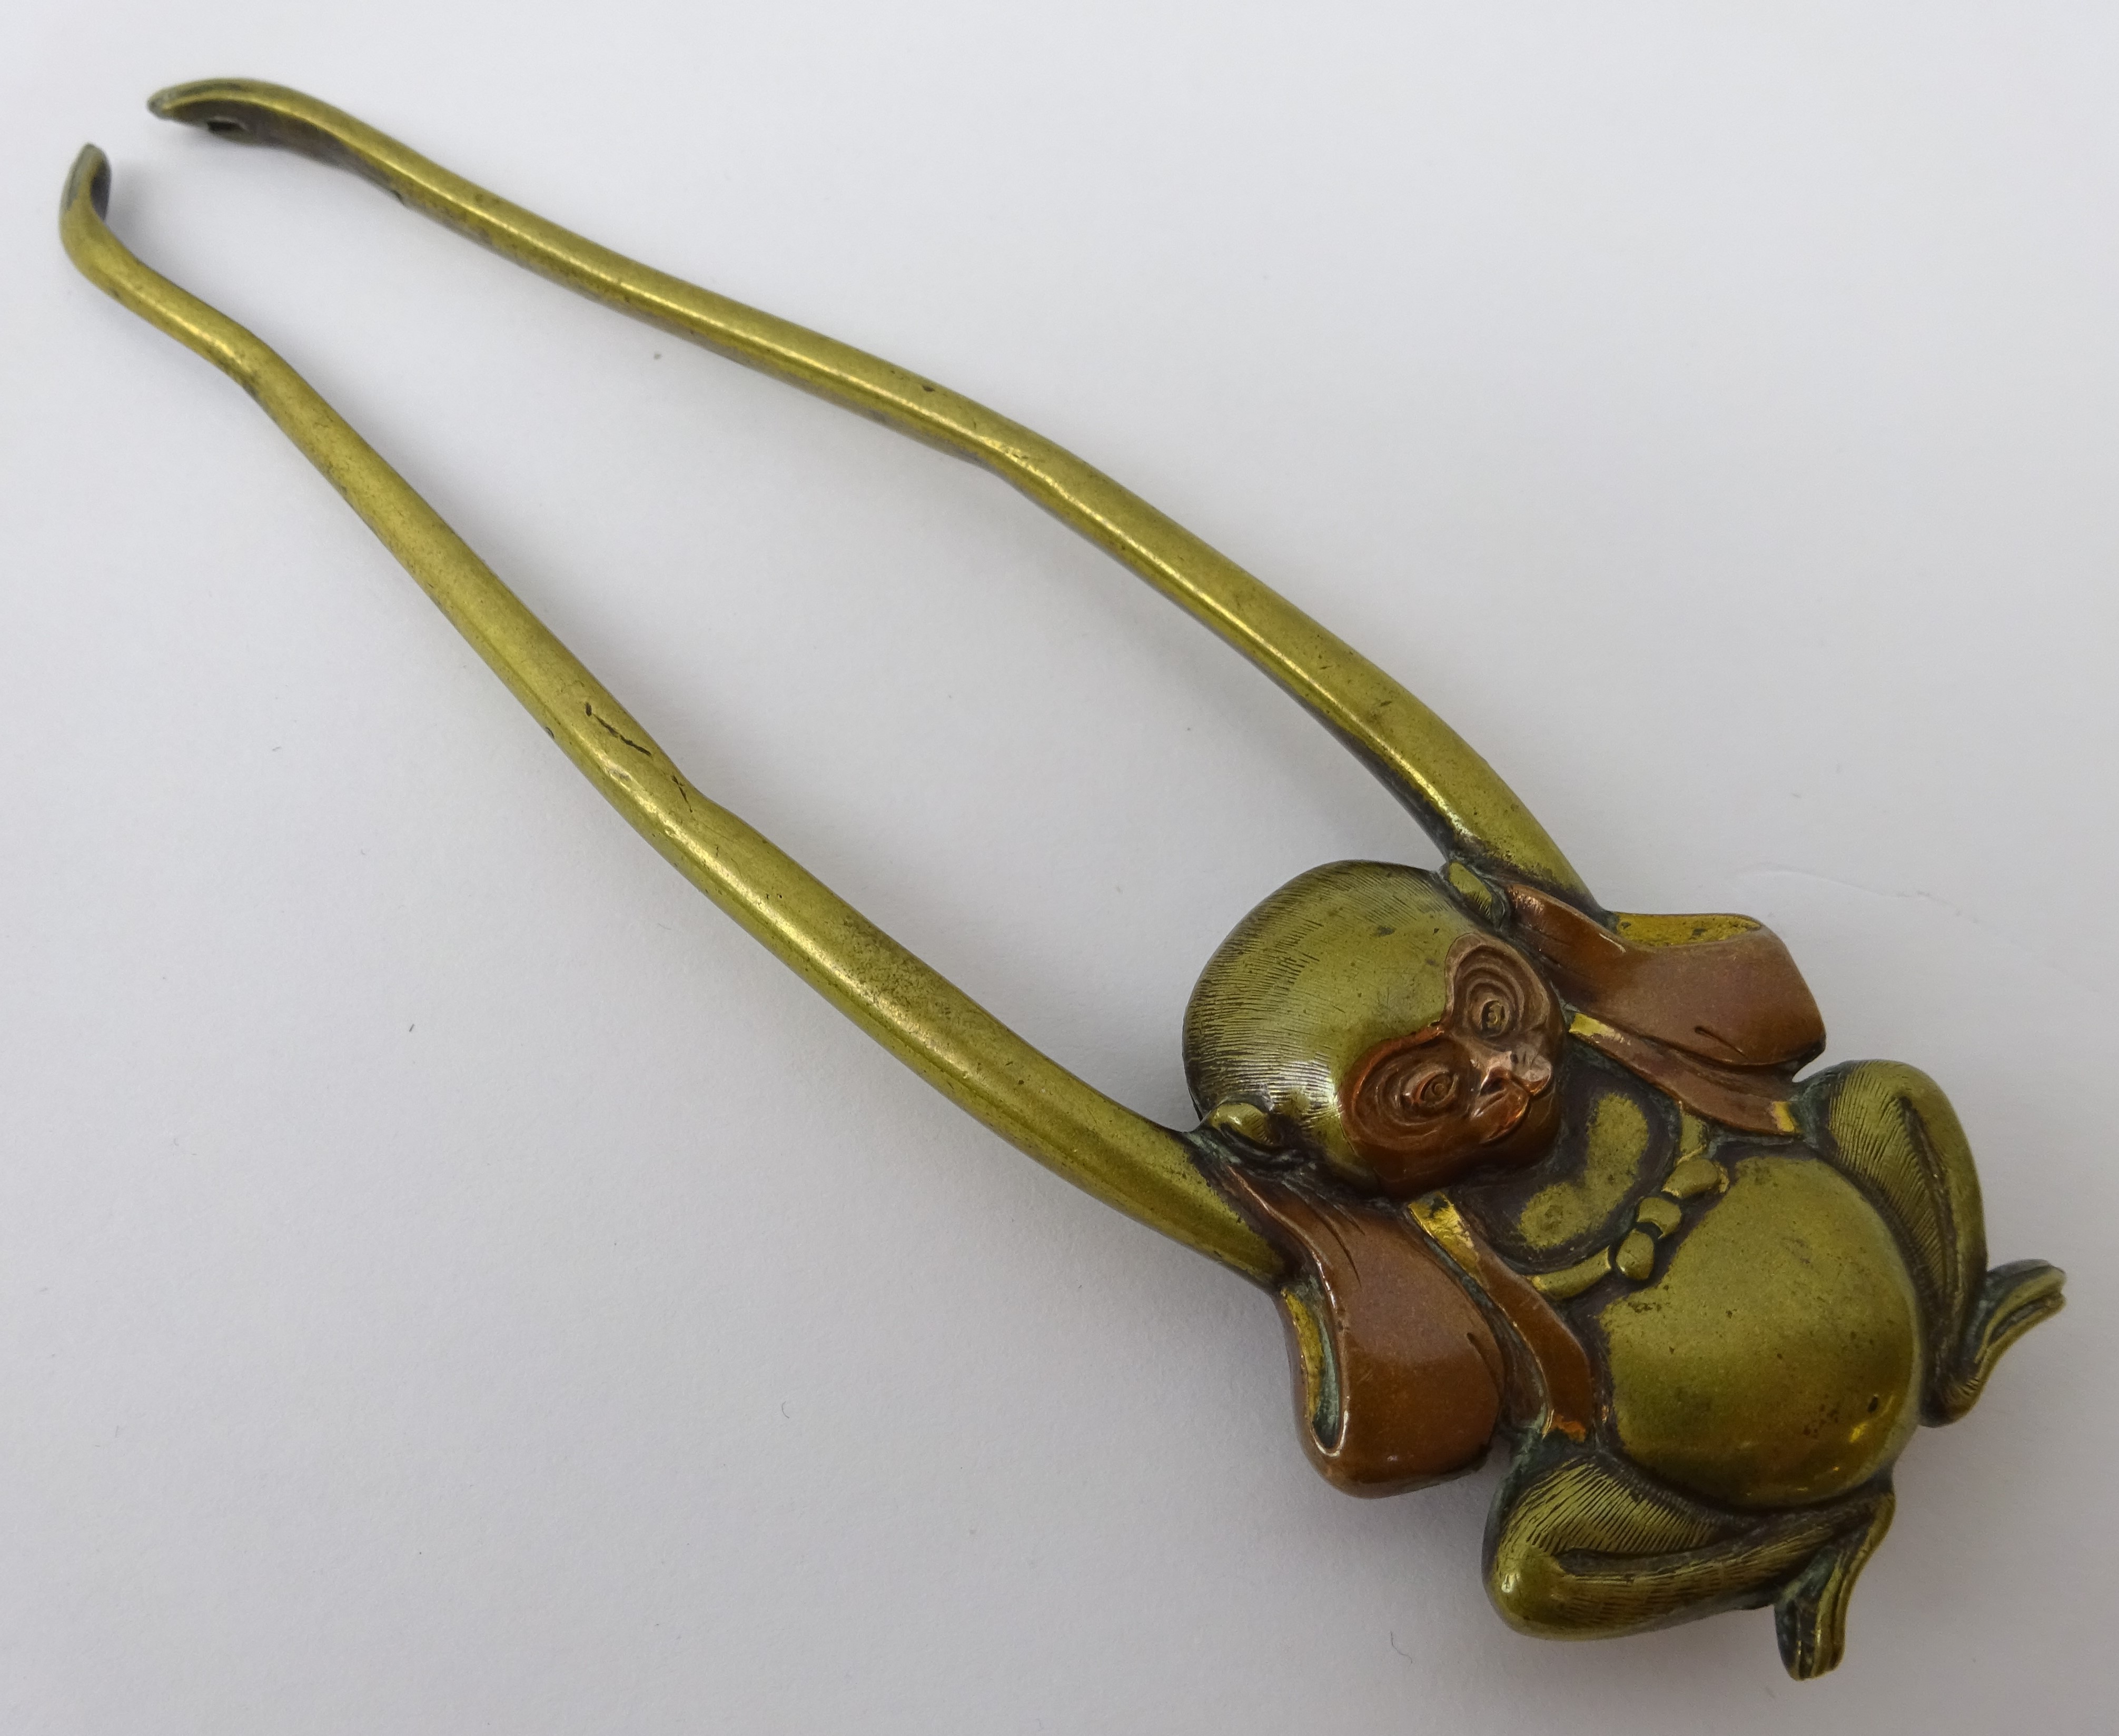 19th century Japanese bronze Sashi type netsuke modelled as a Monkey with elongated arms with